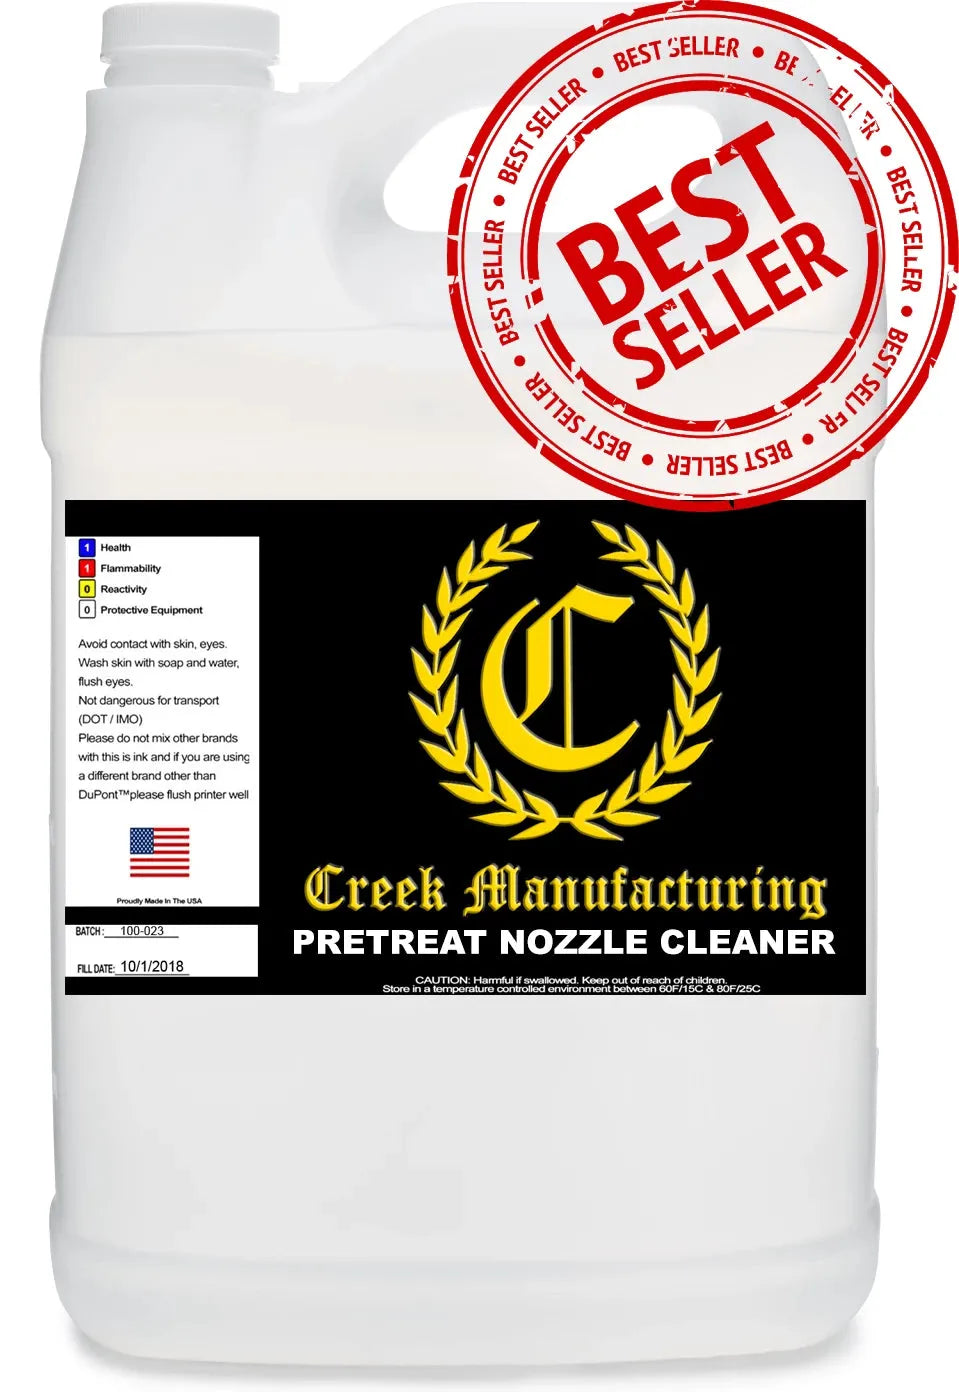 Creek Manufacturing CONCENTRATED Pretreat Nozzle Cleaner